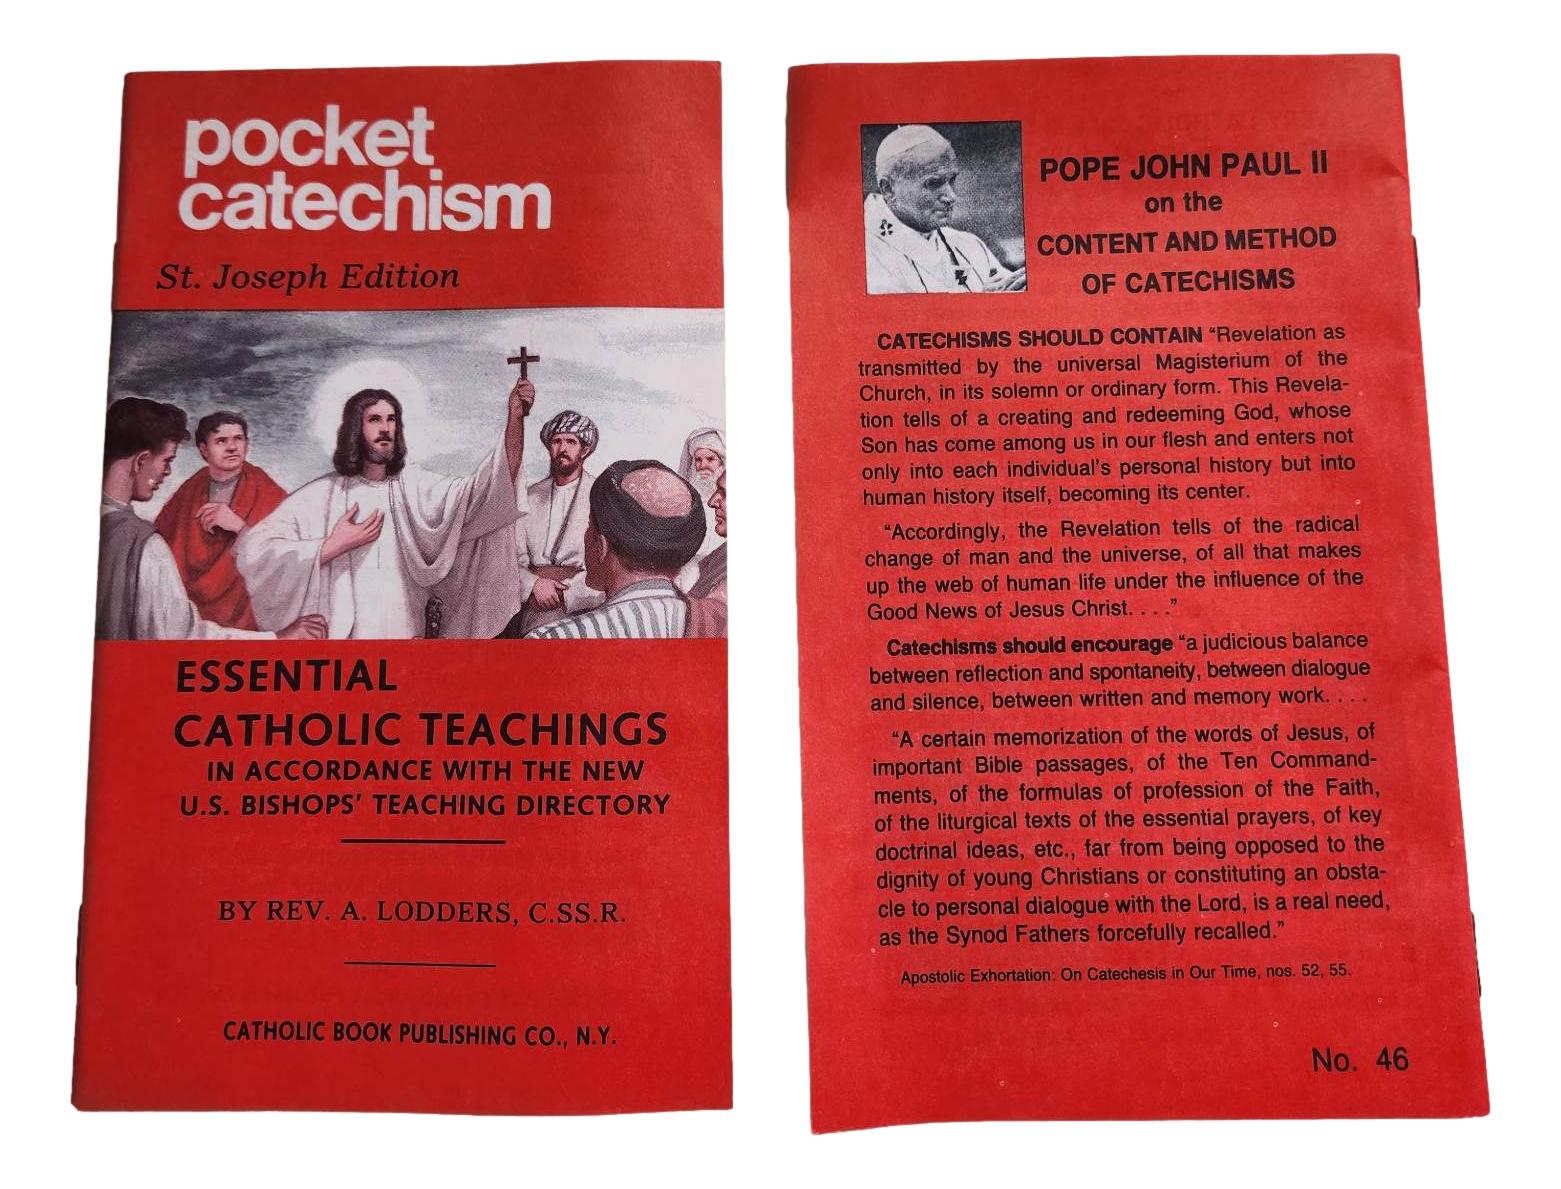 Book Pocket Catechism St. Joseph Edition Essential Catholic Teachings 62 Pages